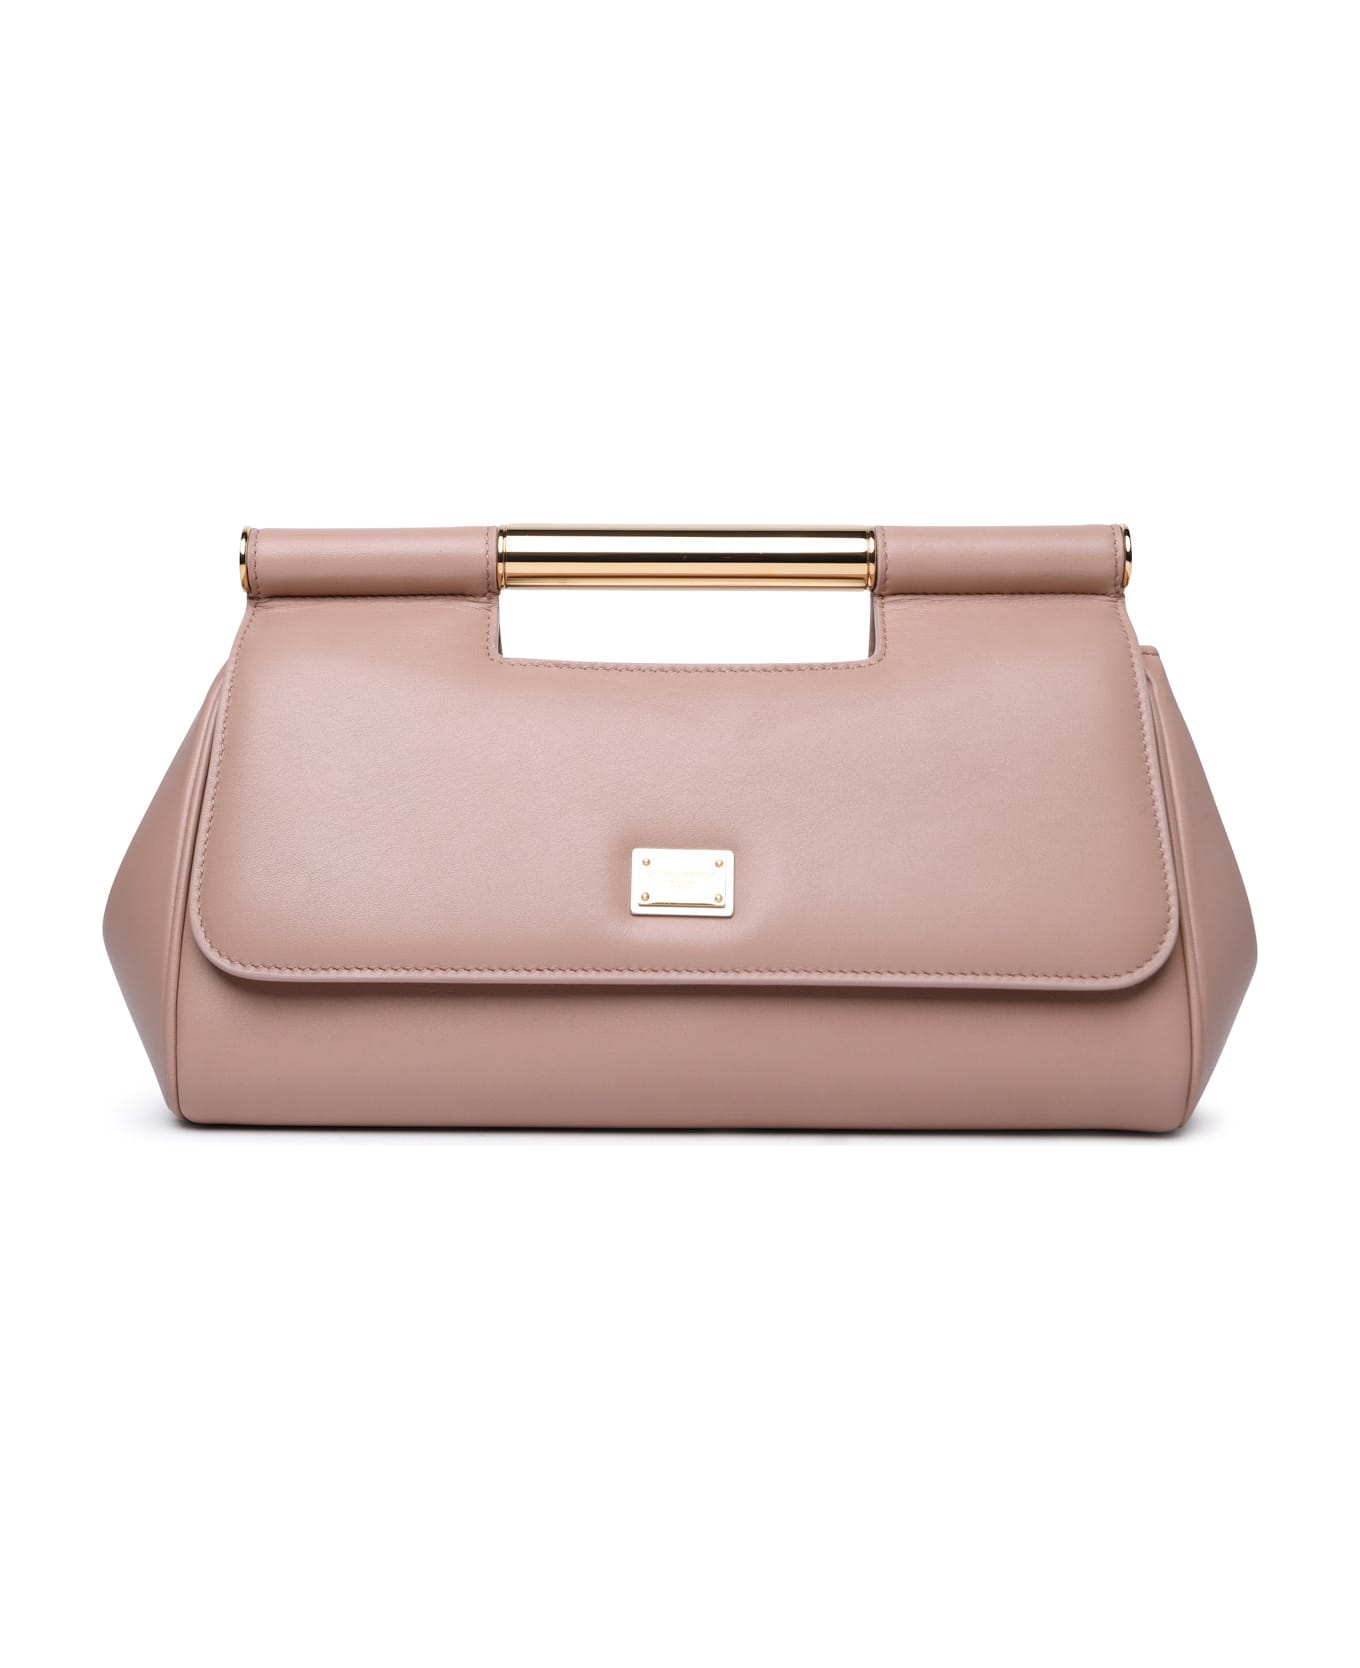 Dolce & Gabbana Sicily' Large Leather Clutch Nude - Beige クラッチバッグ